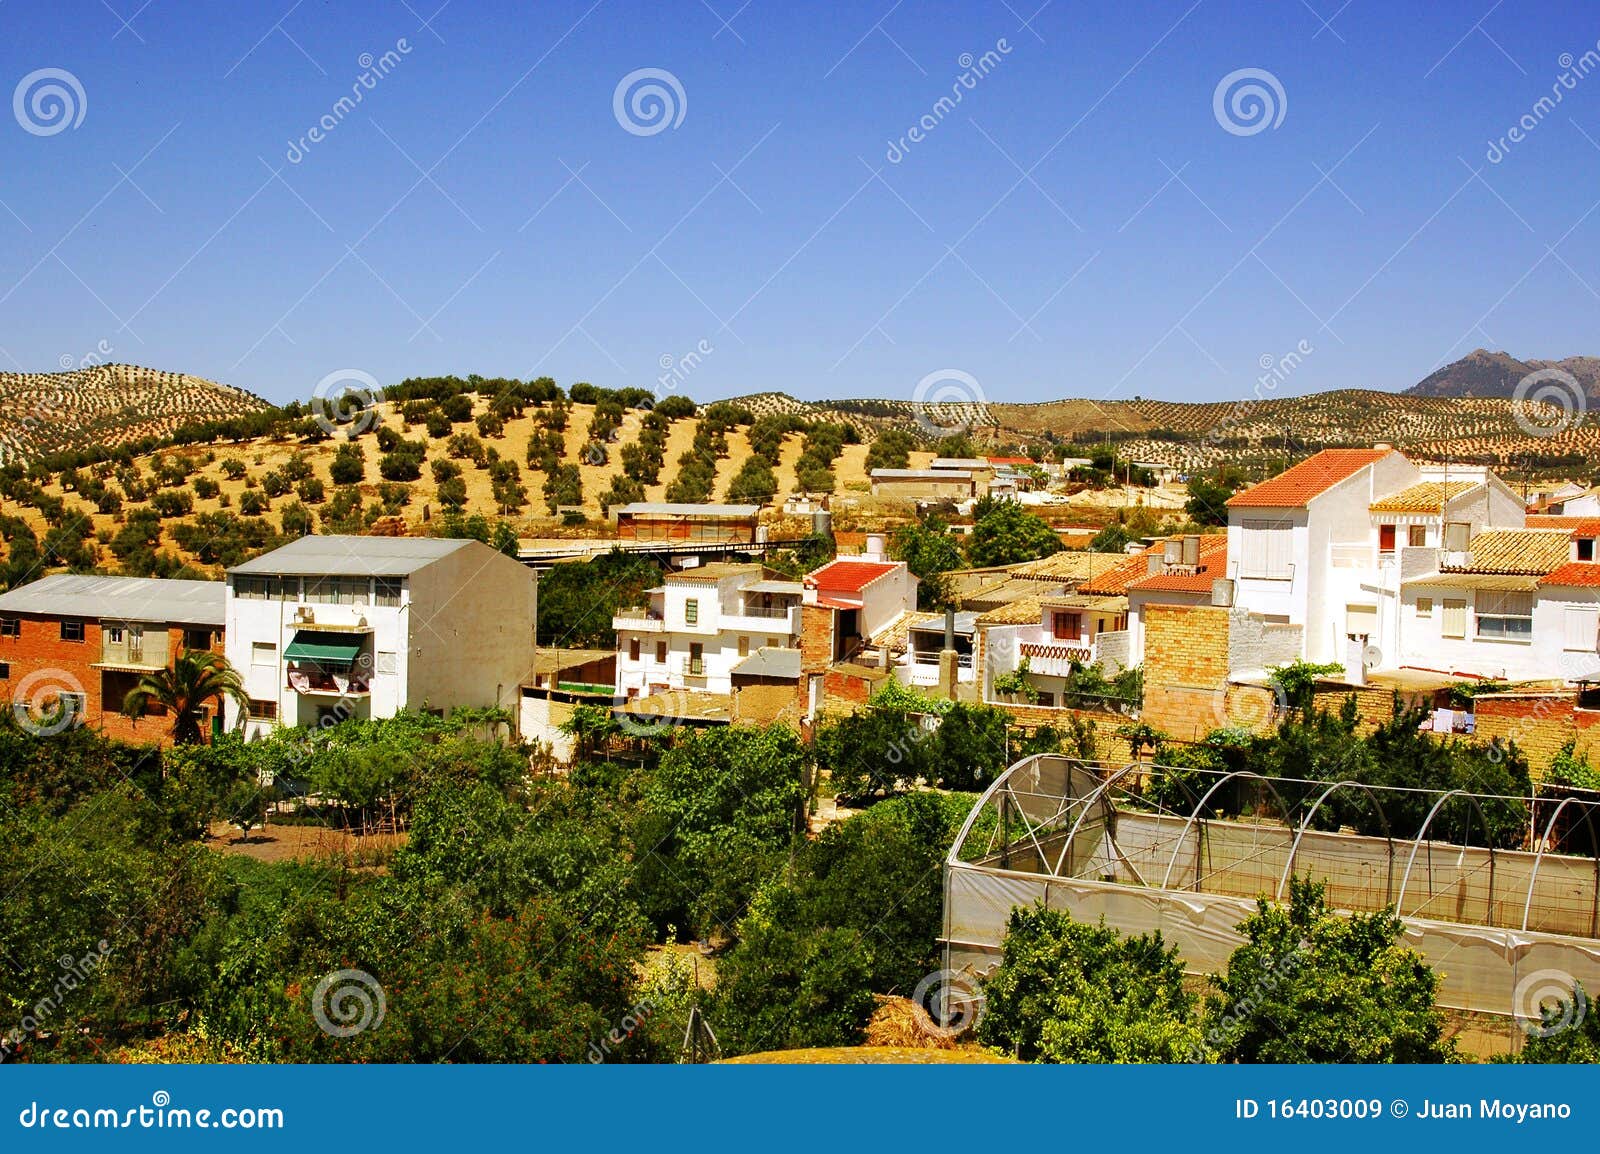 rural village in andalusia, spain